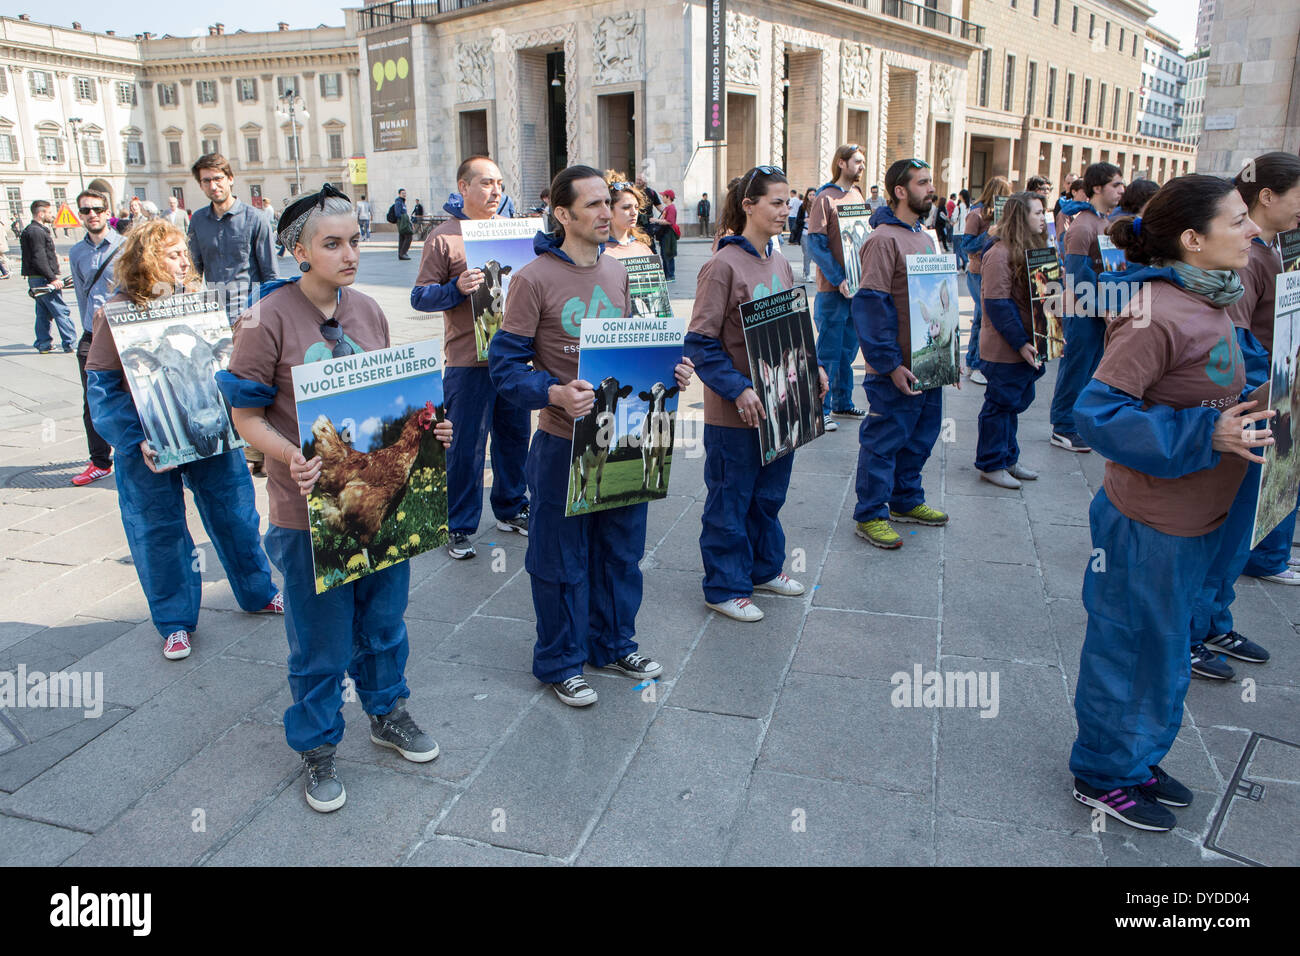 Milan Italy. 13th April 2014. Protest of the 'Essere Animali.org' against the slaughter of lambs at Easter in the Piazza Duomo Stock Photo